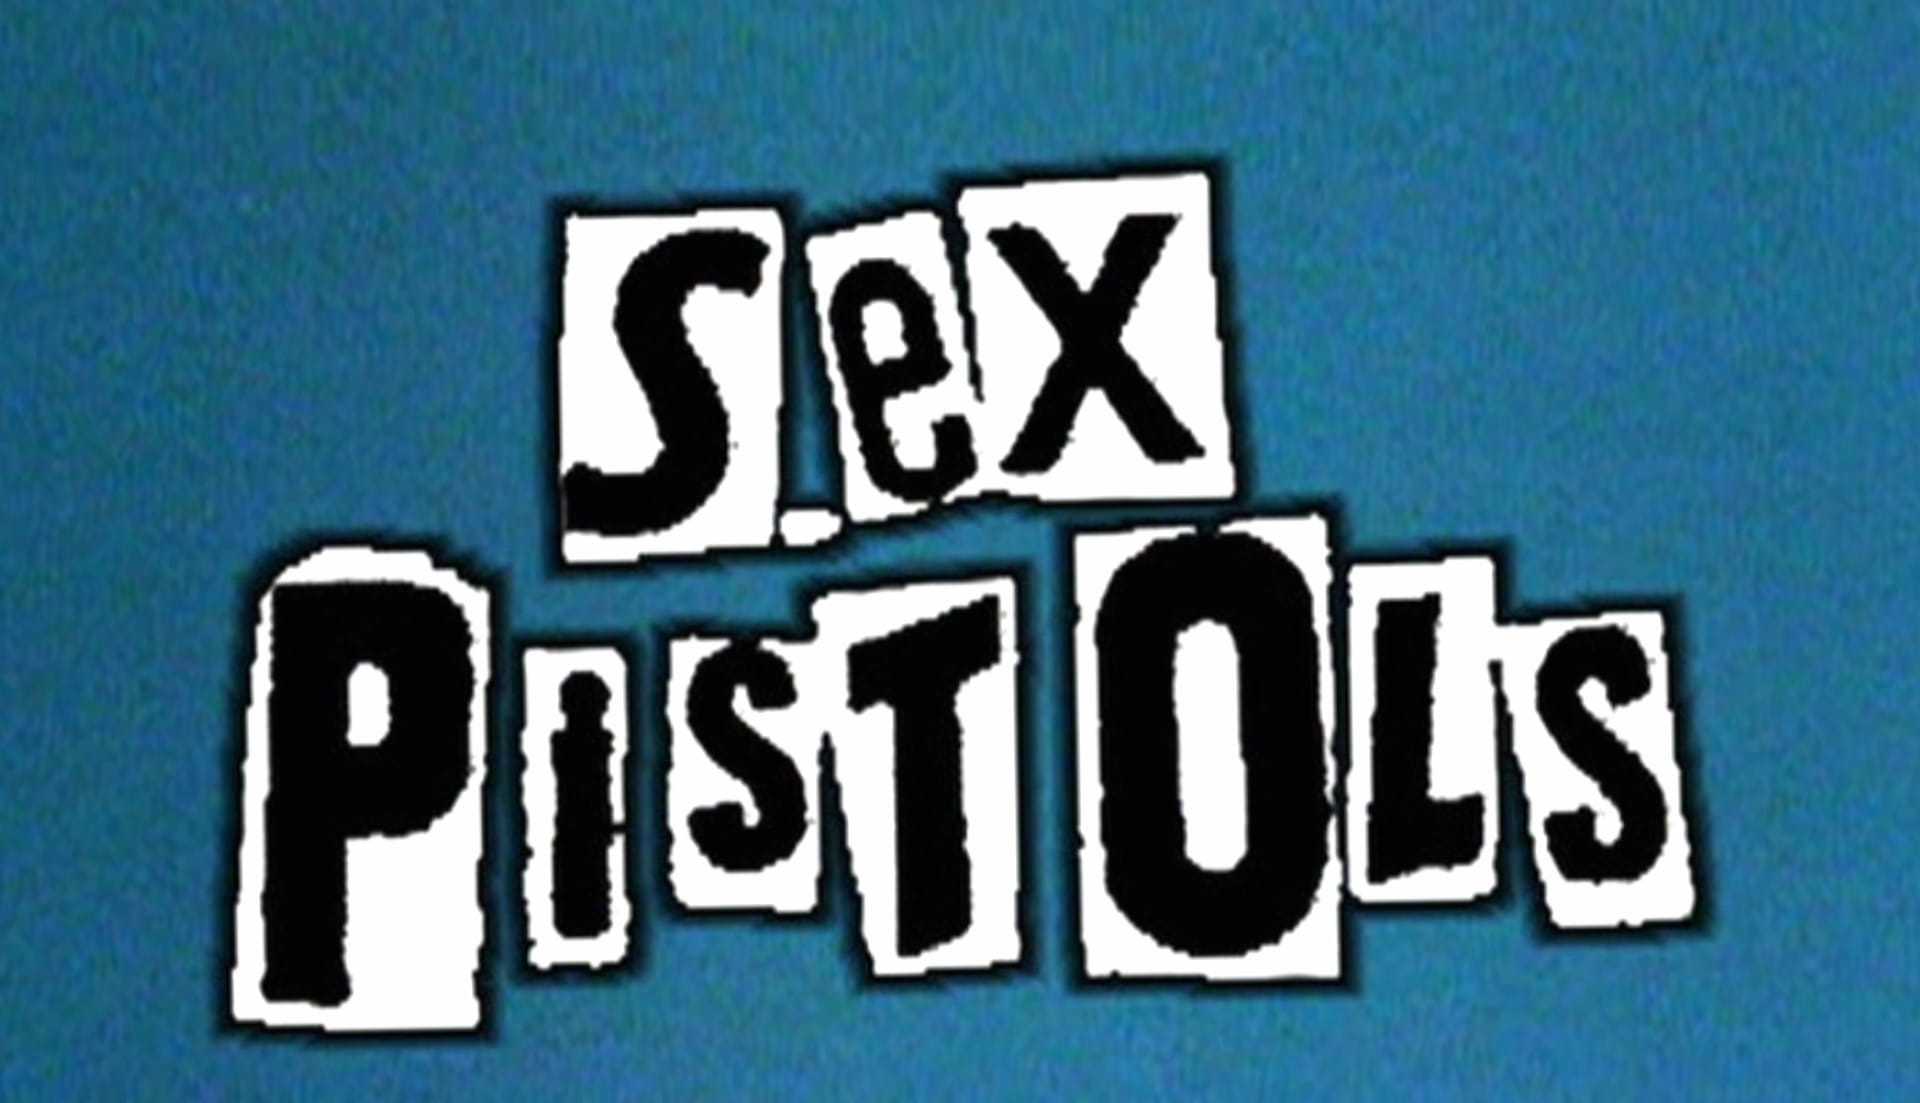 Sex Pistols wallpapers HD quality